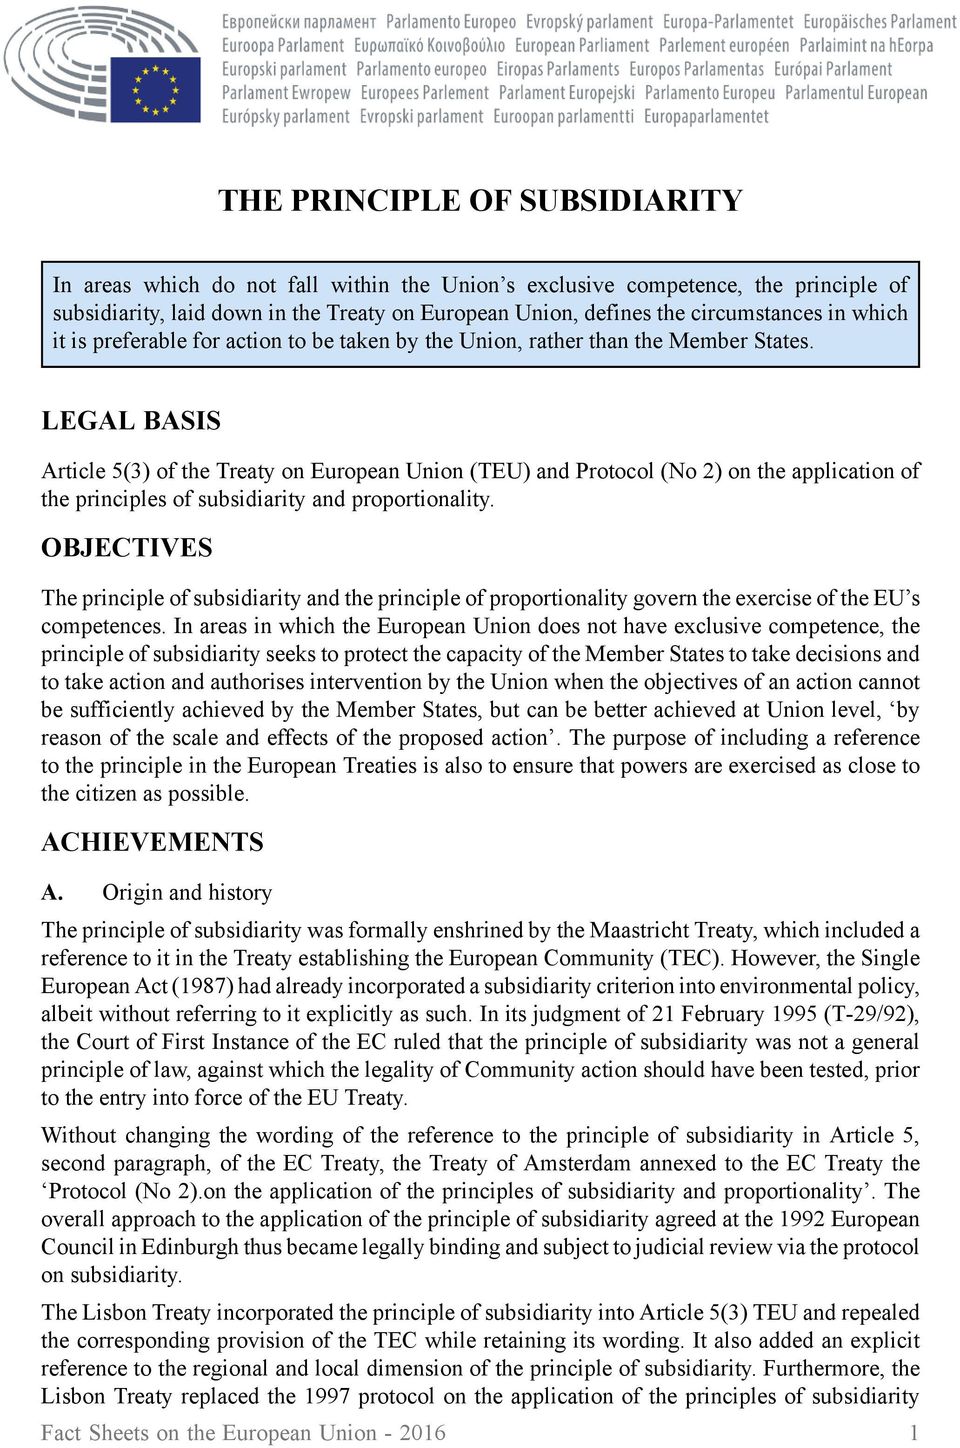 LEGAL BASIS Article 5(3) of the Treaty on European Union (TEU) and Protocol (No 2) on the application of the principles of subsidiarity and proportionality.